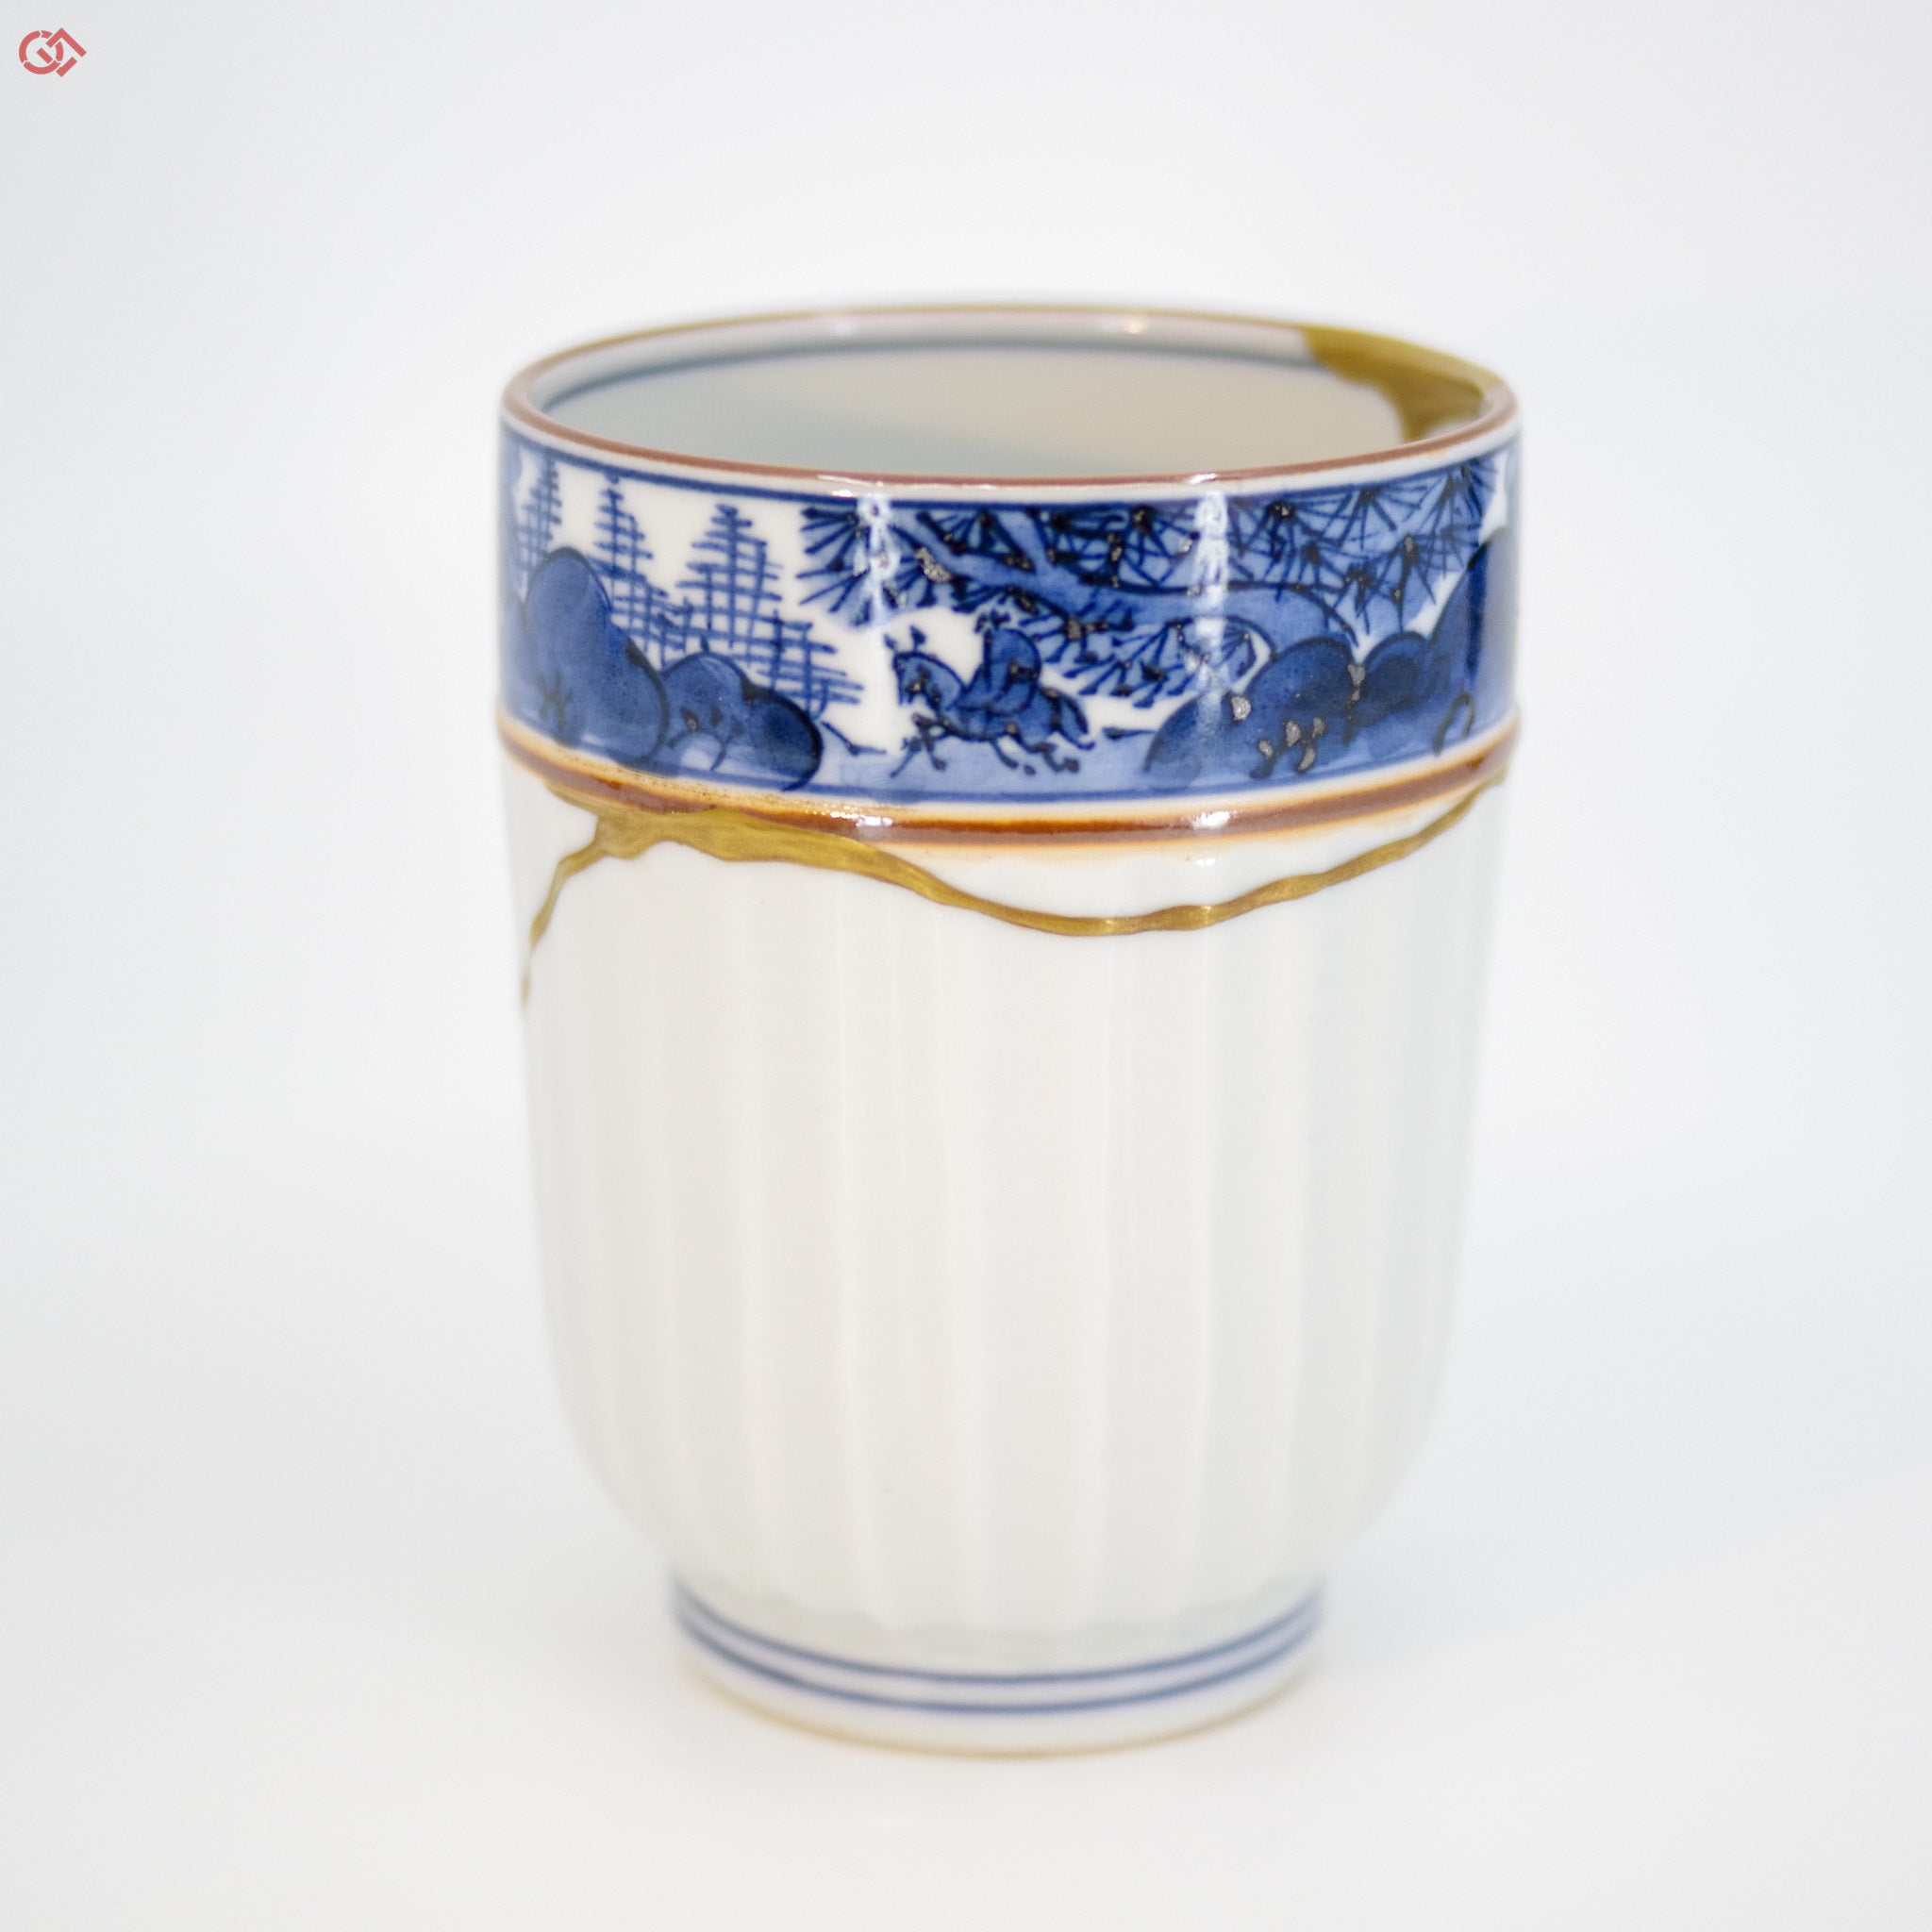 Enlarged view of authentic Kintsugi art